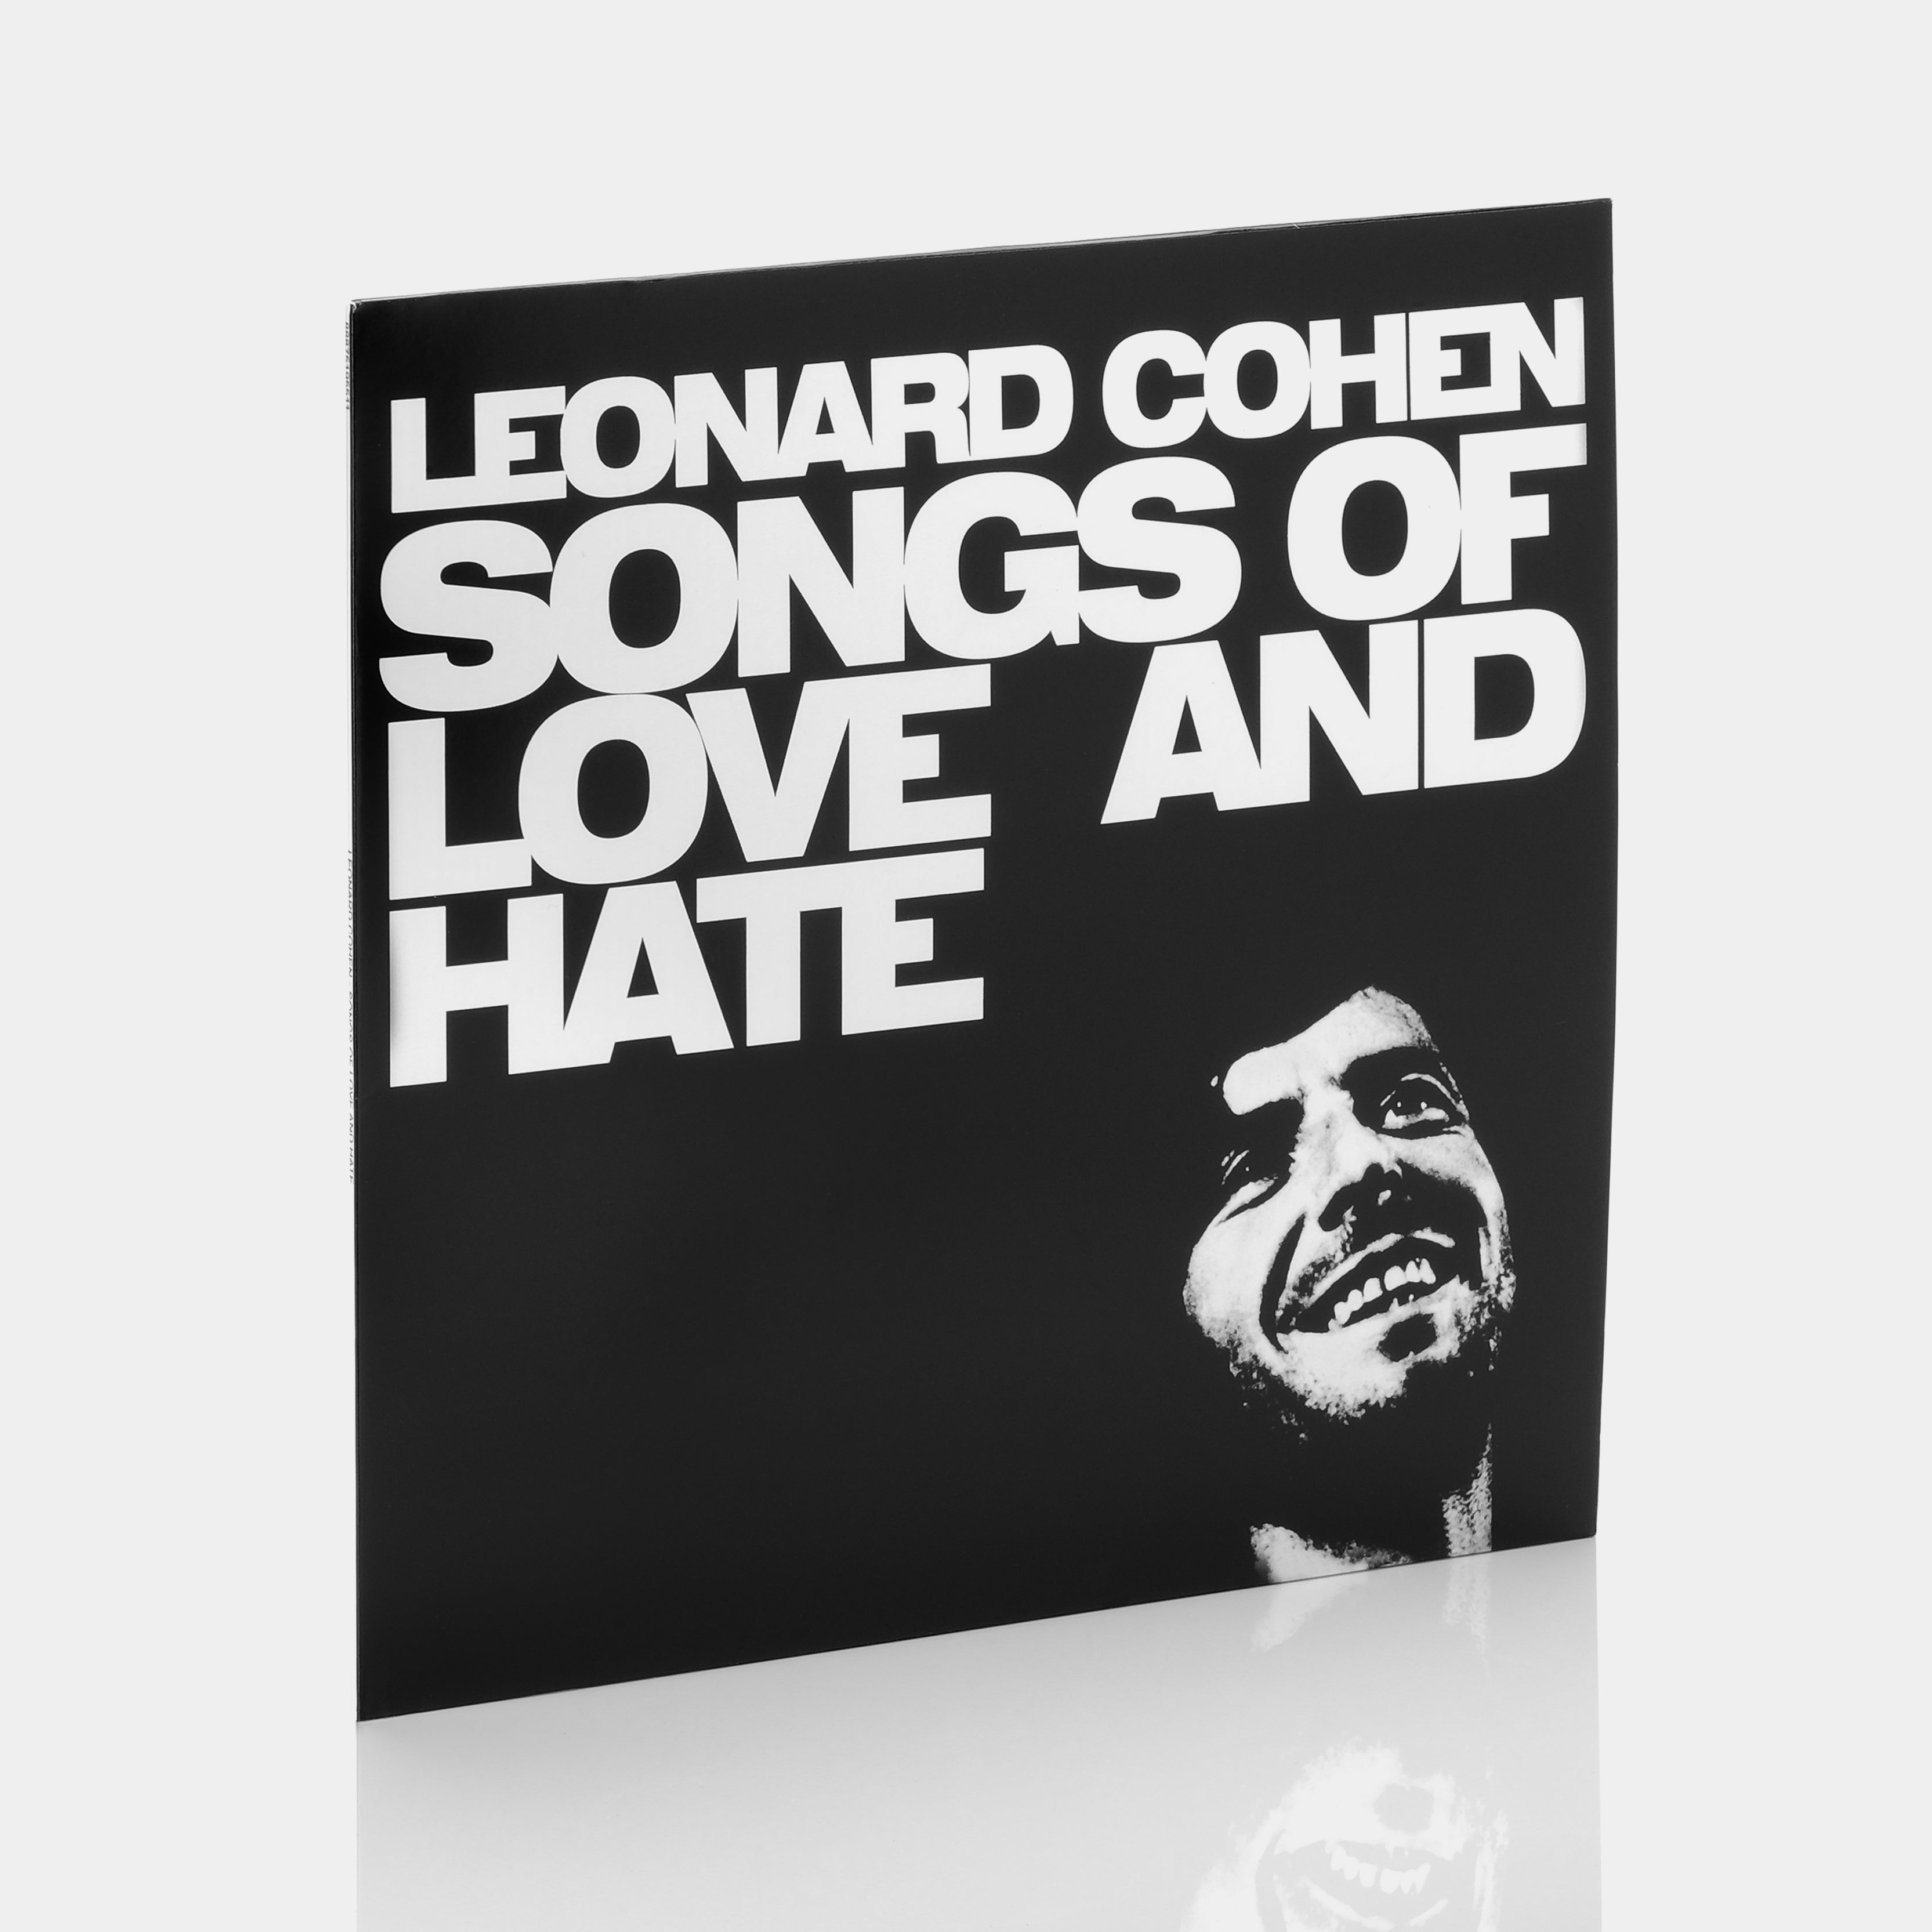 Leonard Cohen - Songs of Love and Hate LP Vinyl Record